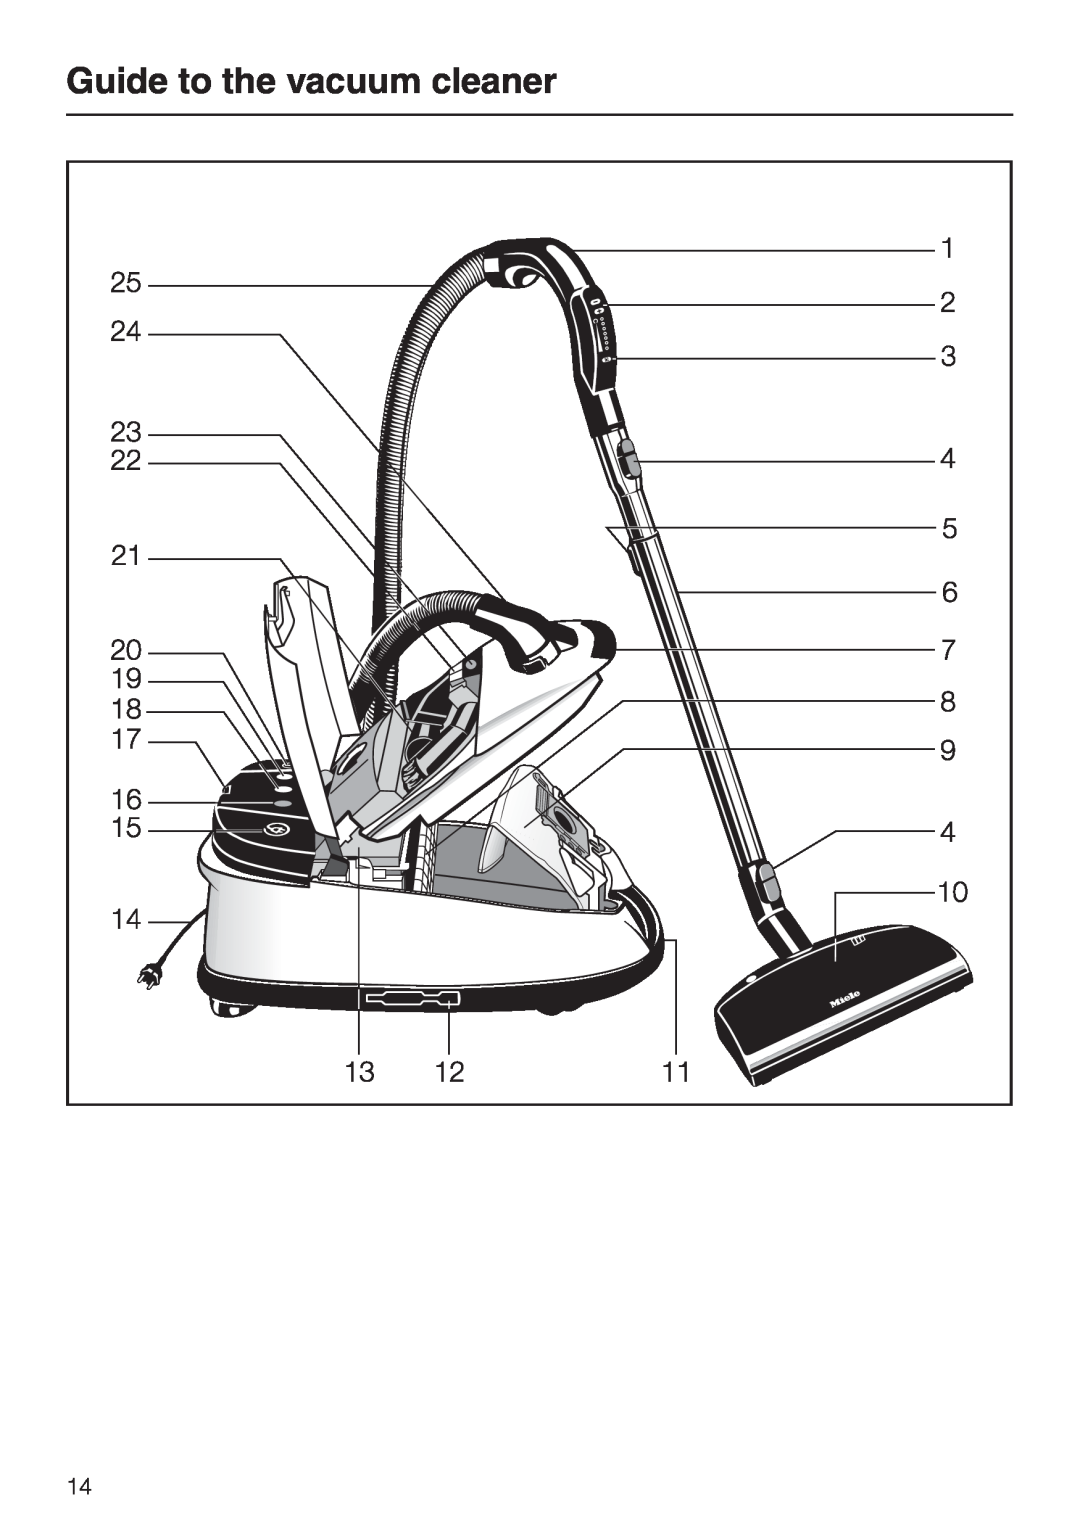 Miele S 658 manual Guide to the vacuum cleaner 